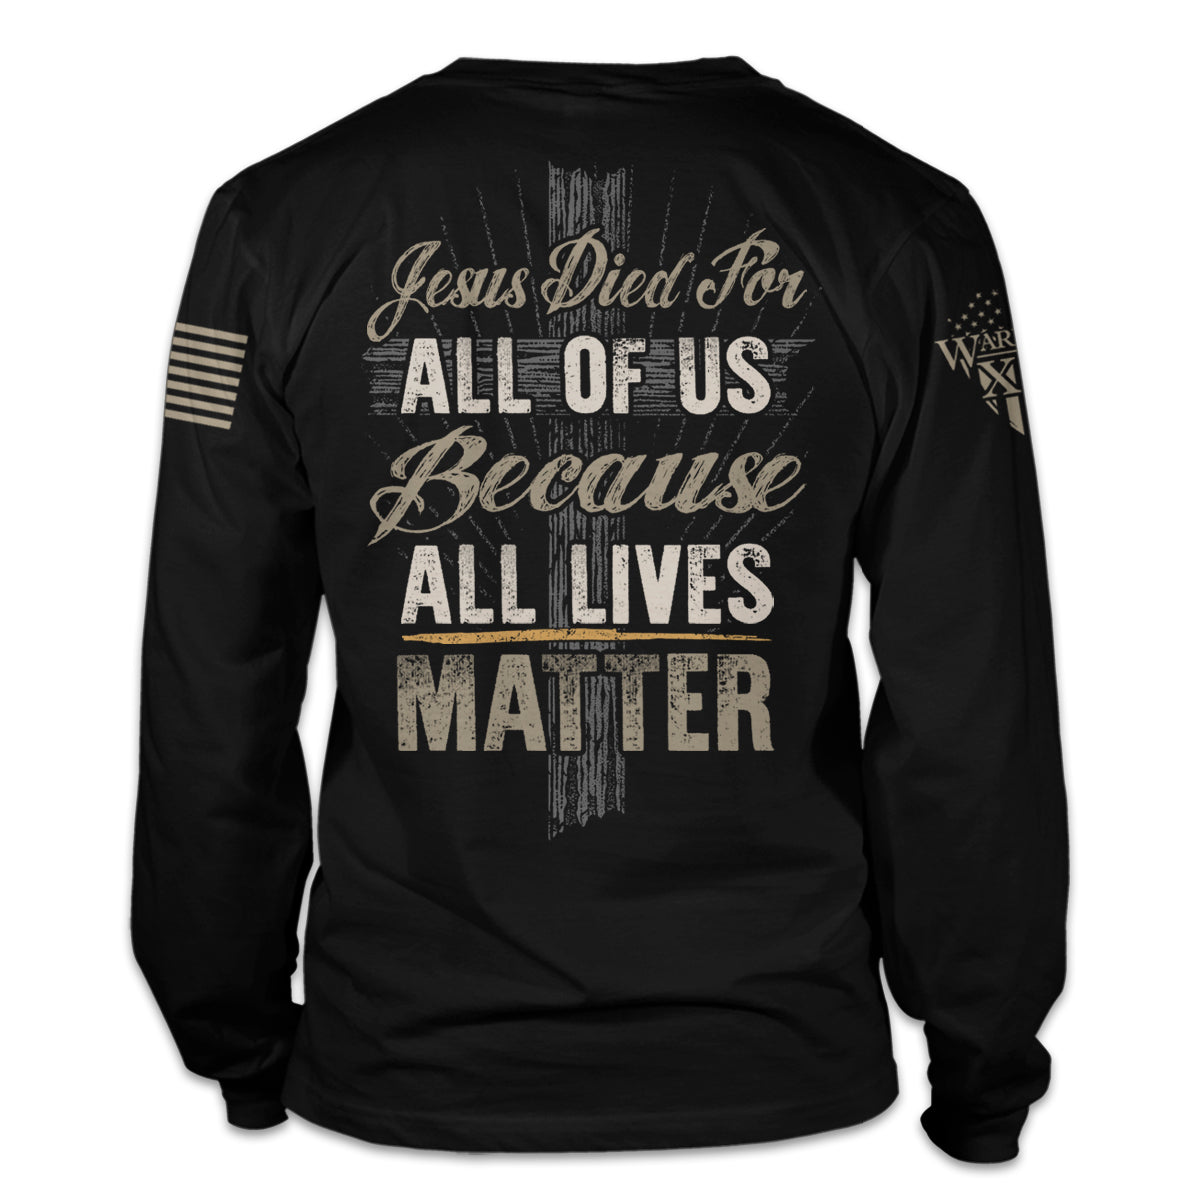 A black long sleeve shirt with "Jesus died for all of us because ALL LIVES matter" printed on the back of the shirt.